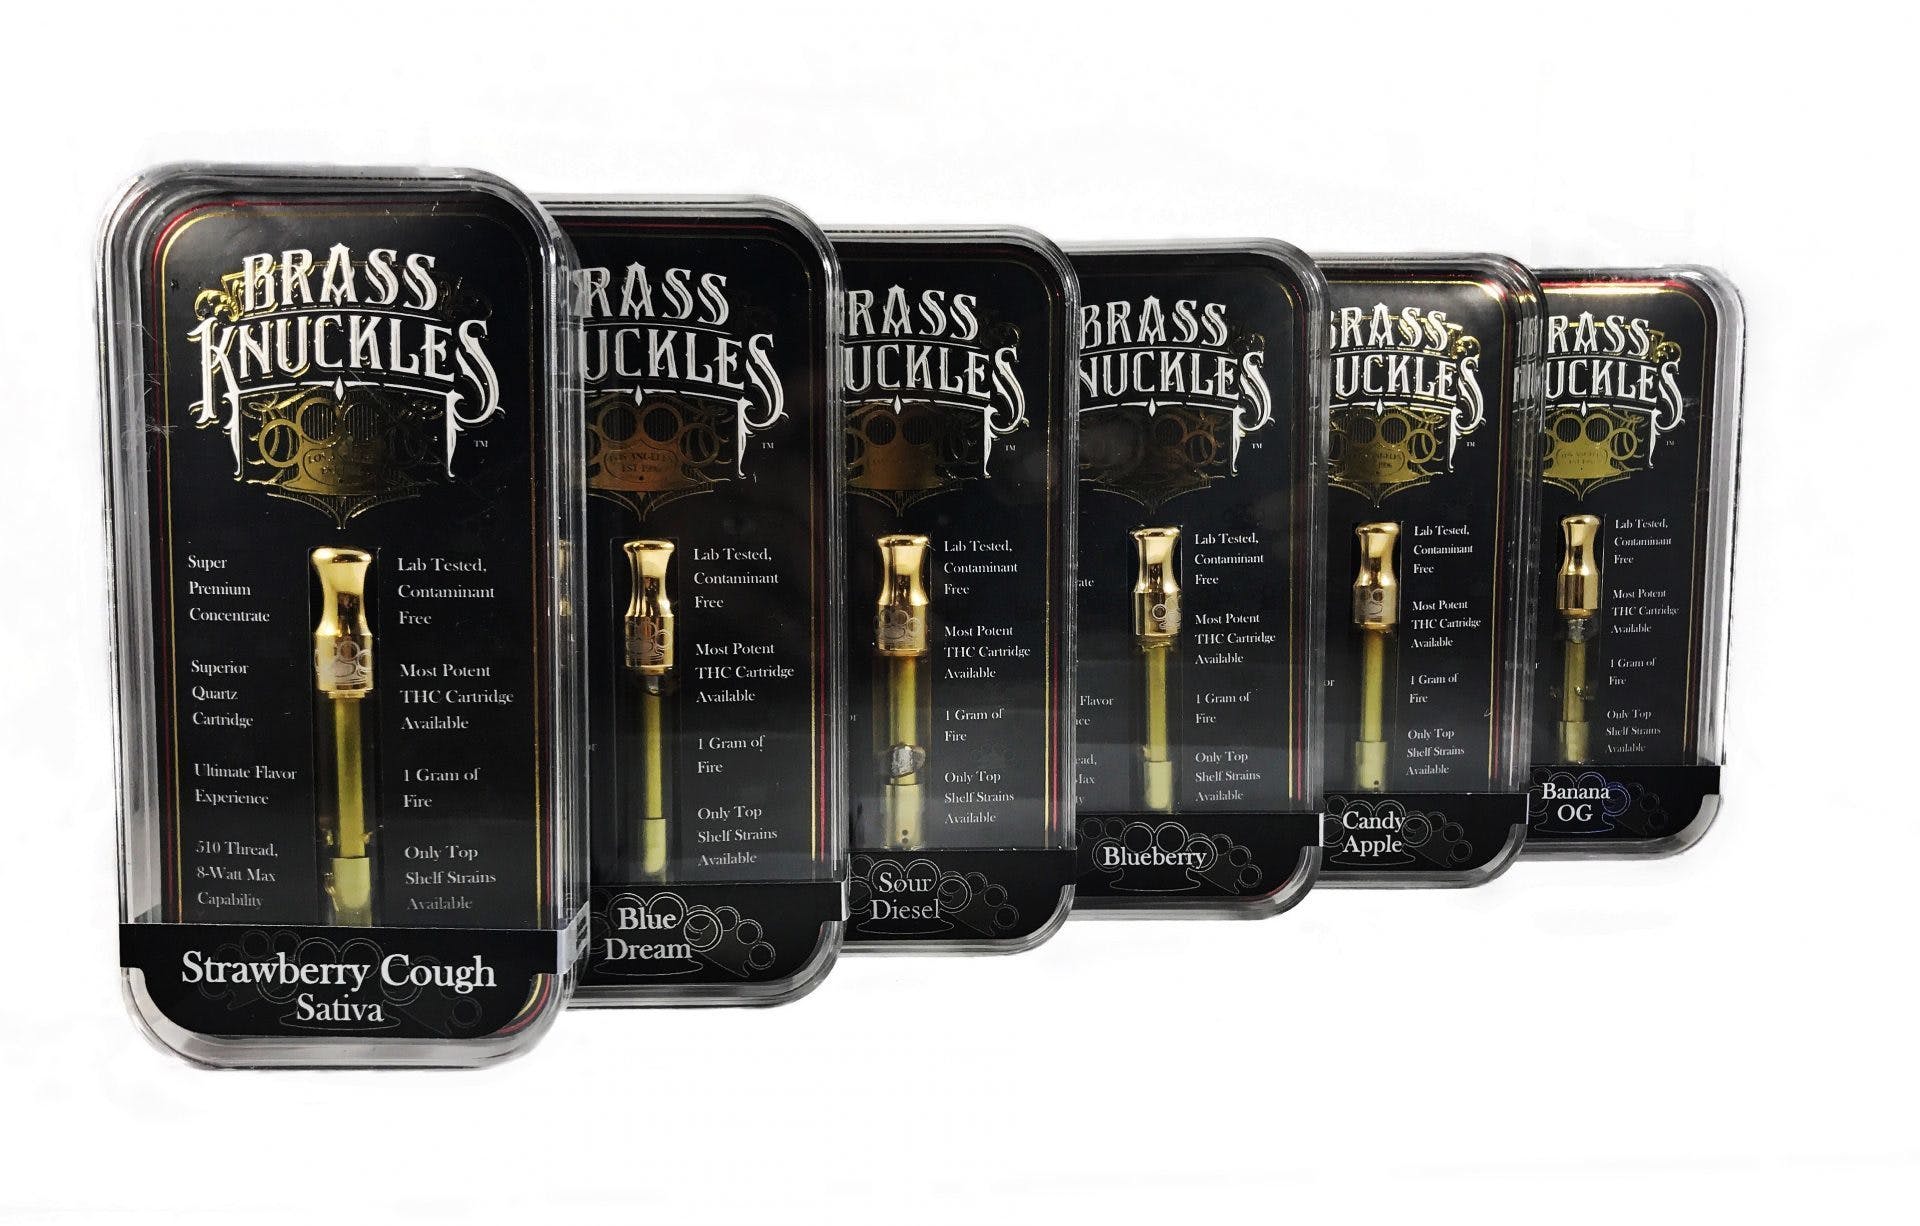 concentrate-brass-knuckles-grape-god-3-for-90-21-mix-and-match-cartridge